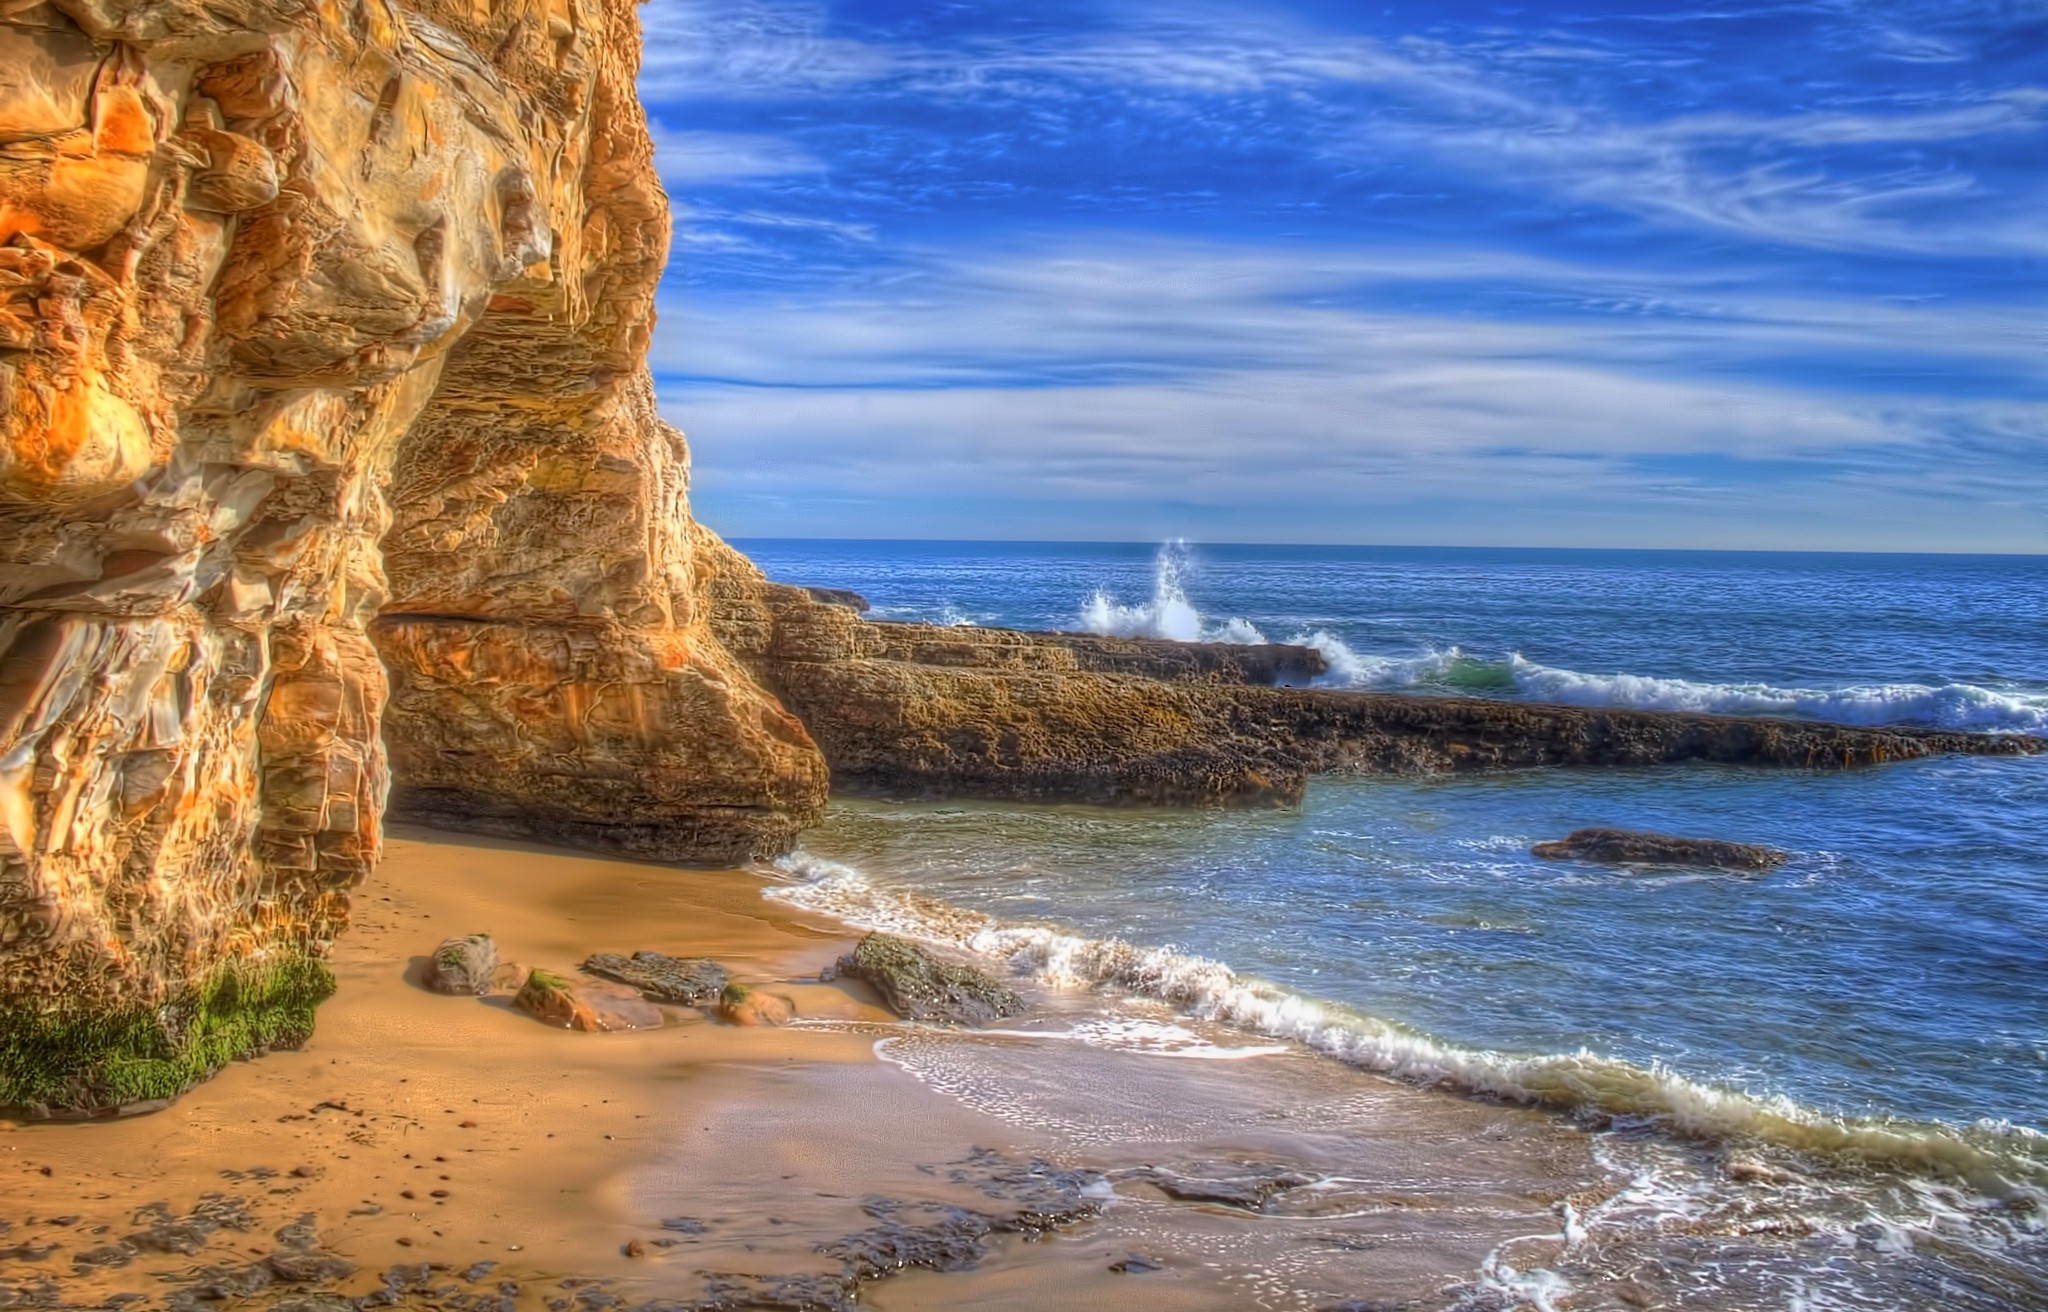 Nature Landscape Beach Sea Coast Rock Cliff Waves Cave Sand Hdr Clouds Wallpapers Hd